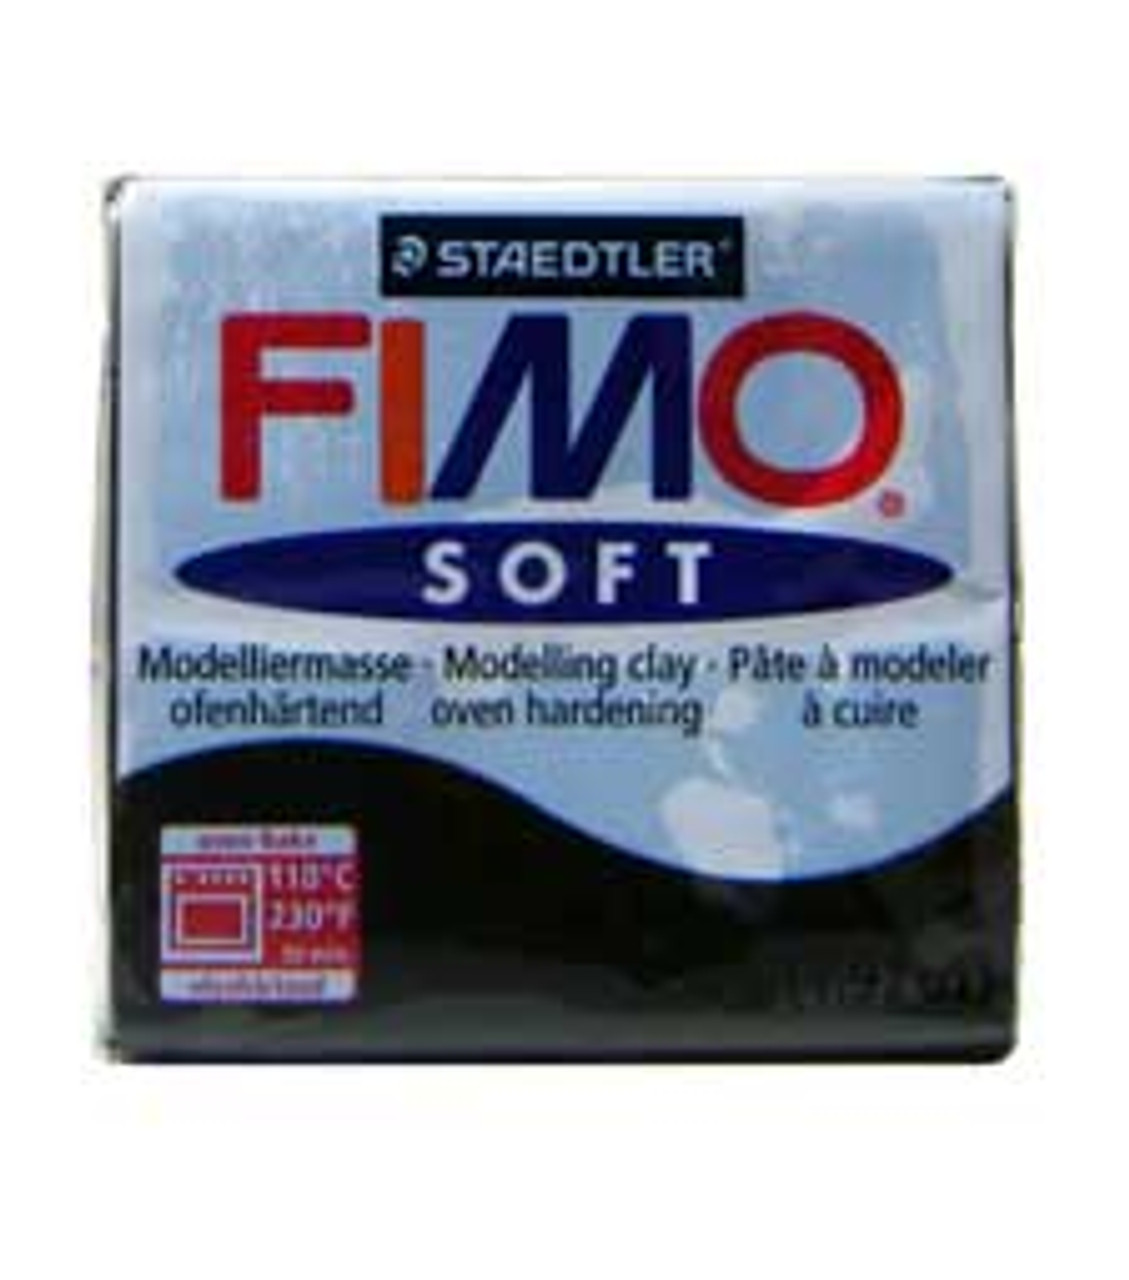 FIMO soft from STAEDTLER: Soft modeling clay for beginners